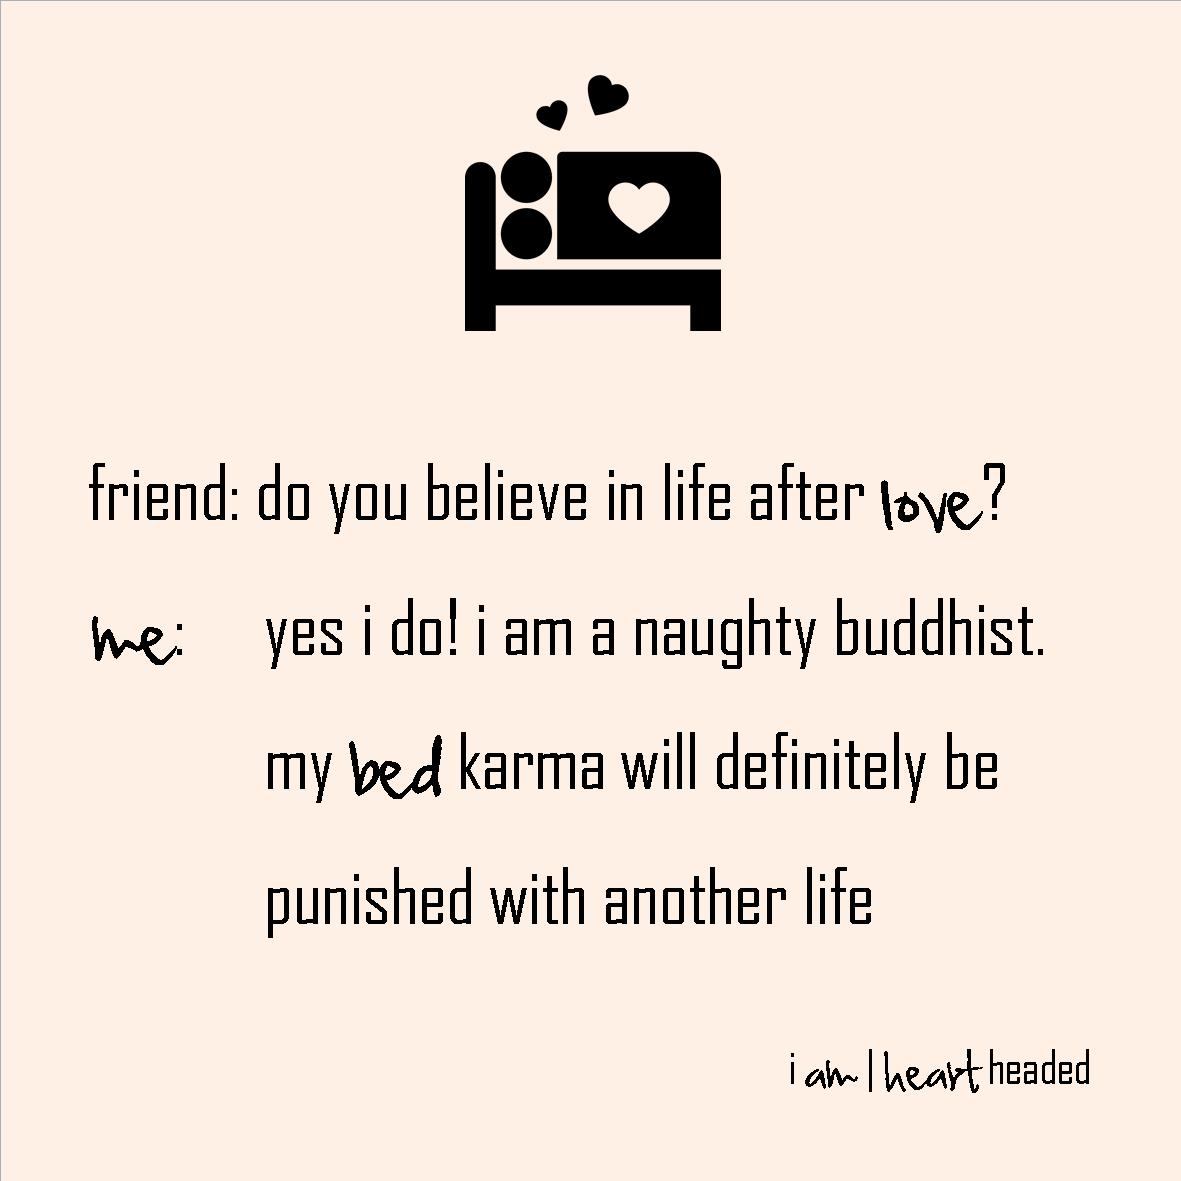 full-size featured image of quote 'naughty buddhist' in category 'dirty' at i am | heart headed